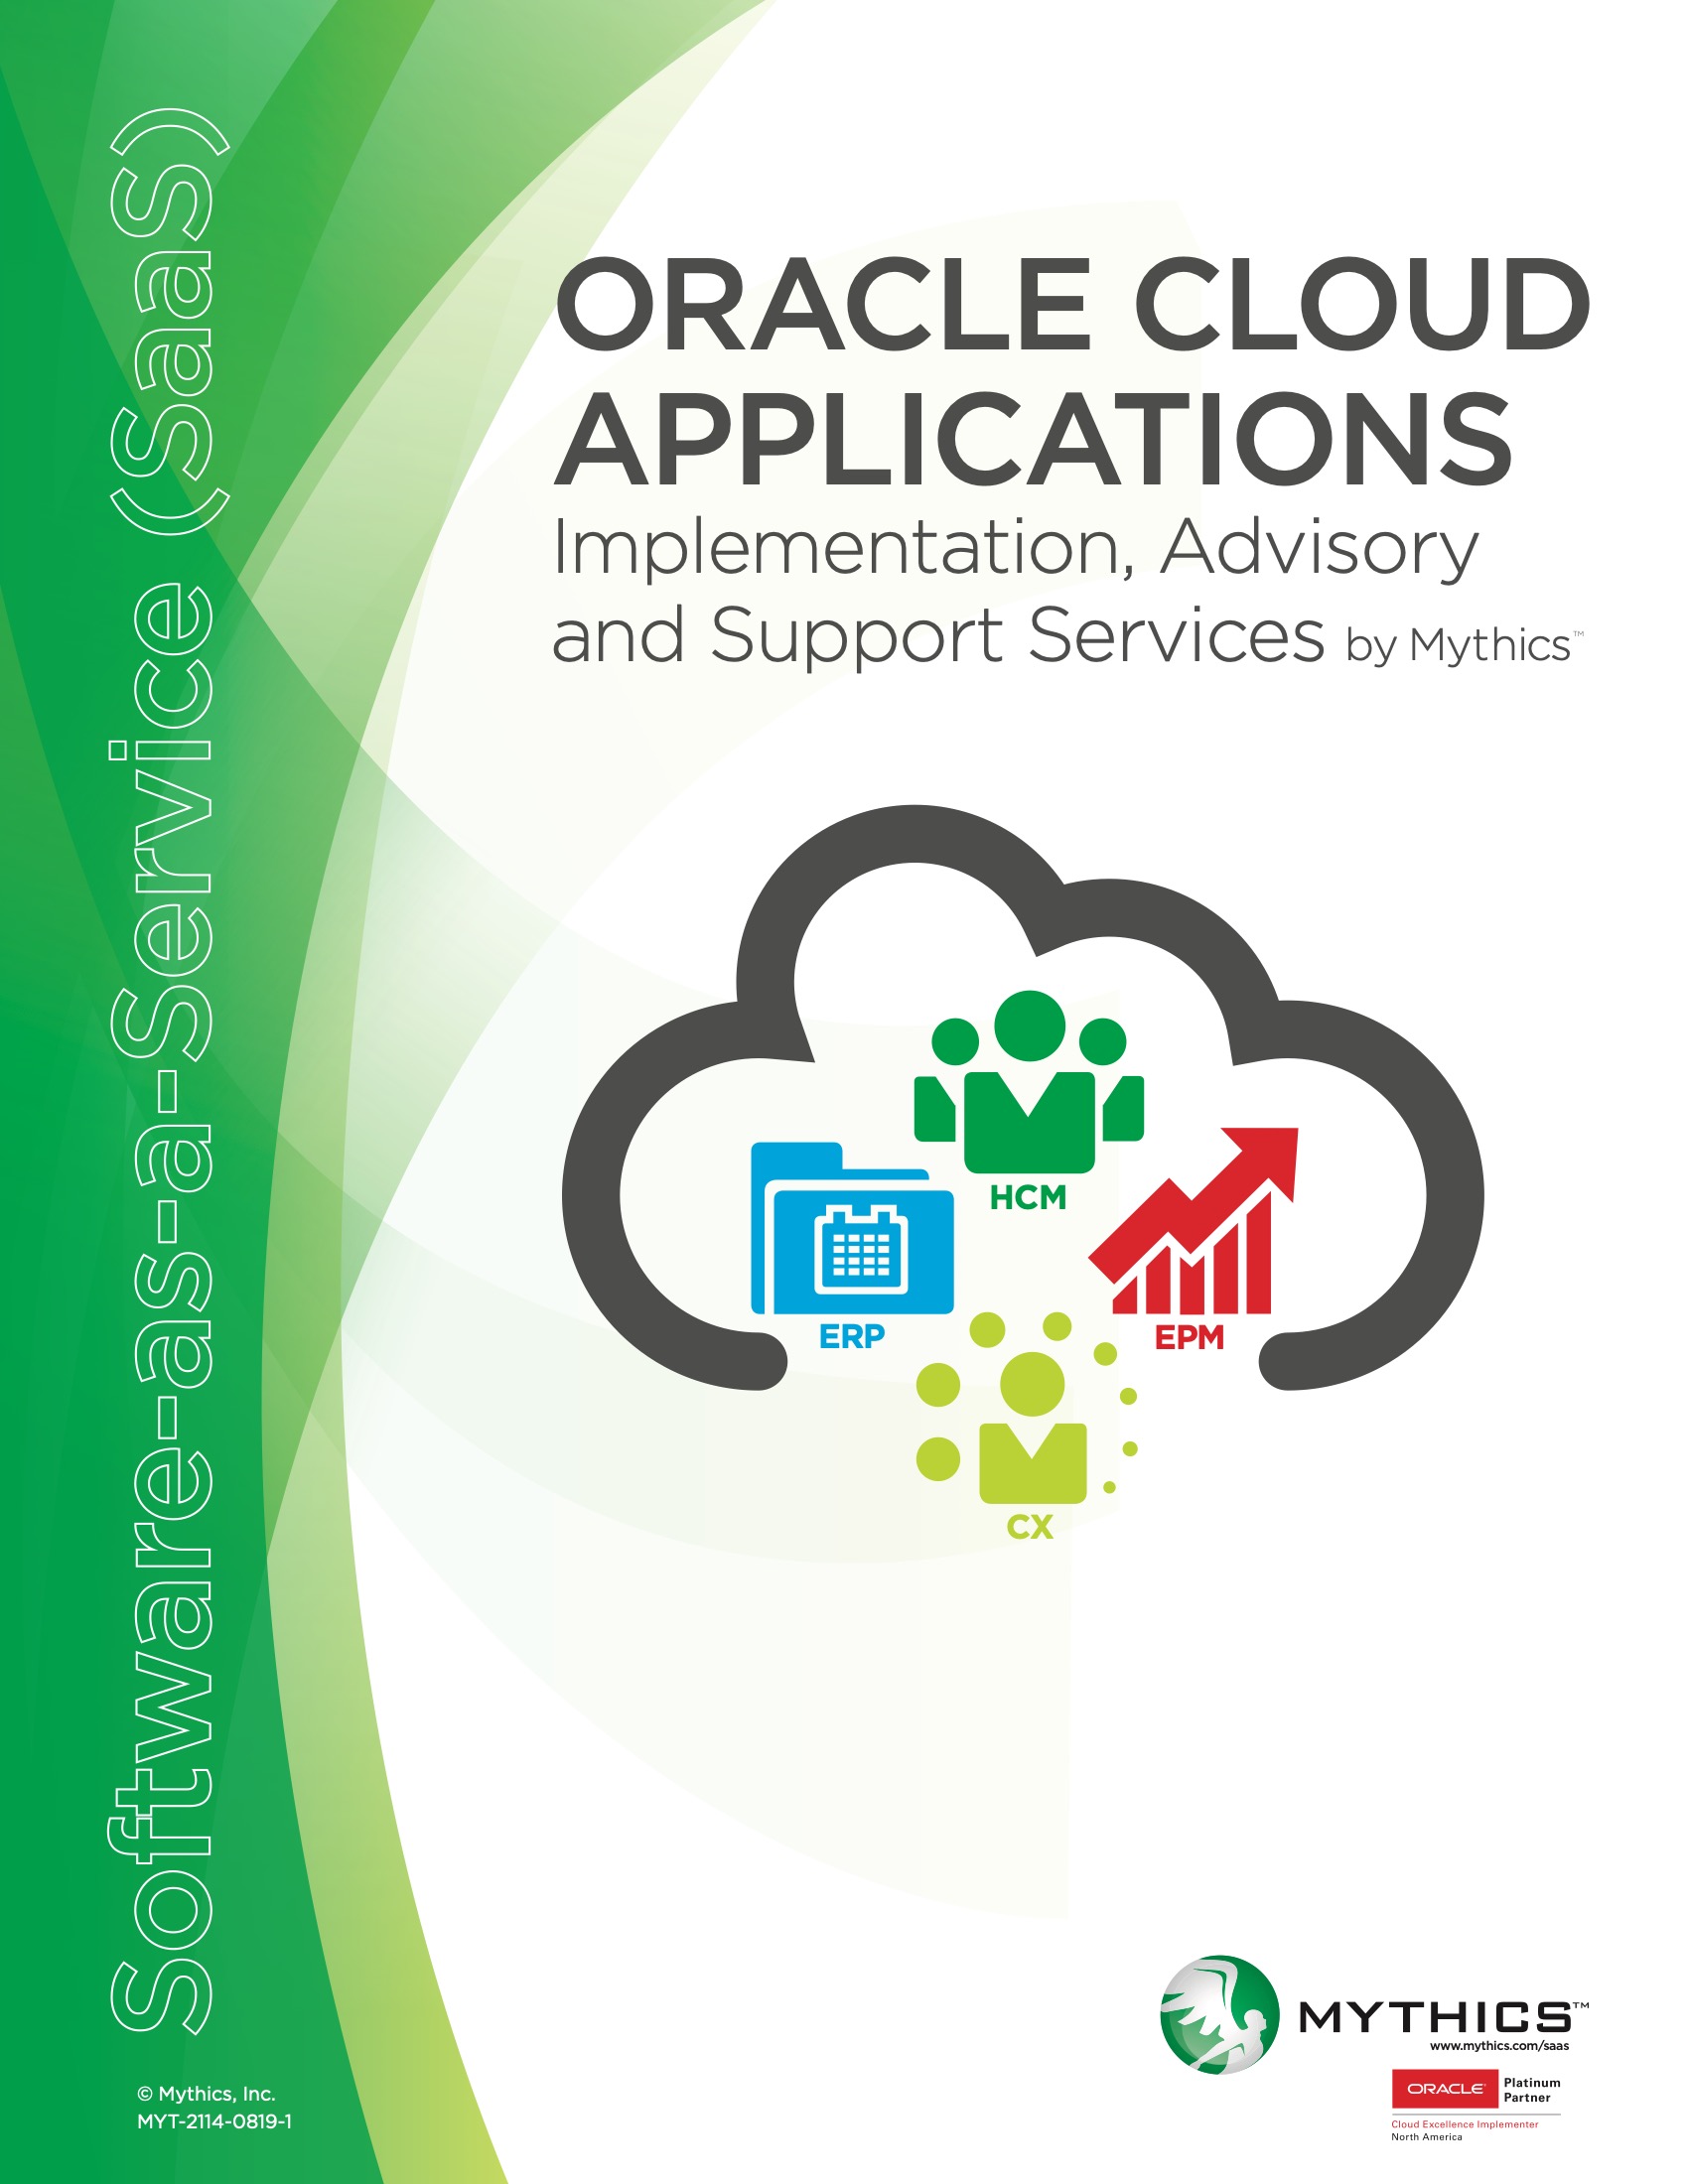 https://mythics.com/wp-content/uploads/2022/06/Mythics-Oracle-Cloud-Applications-SaaS-Services-Brochure-7.jpeg